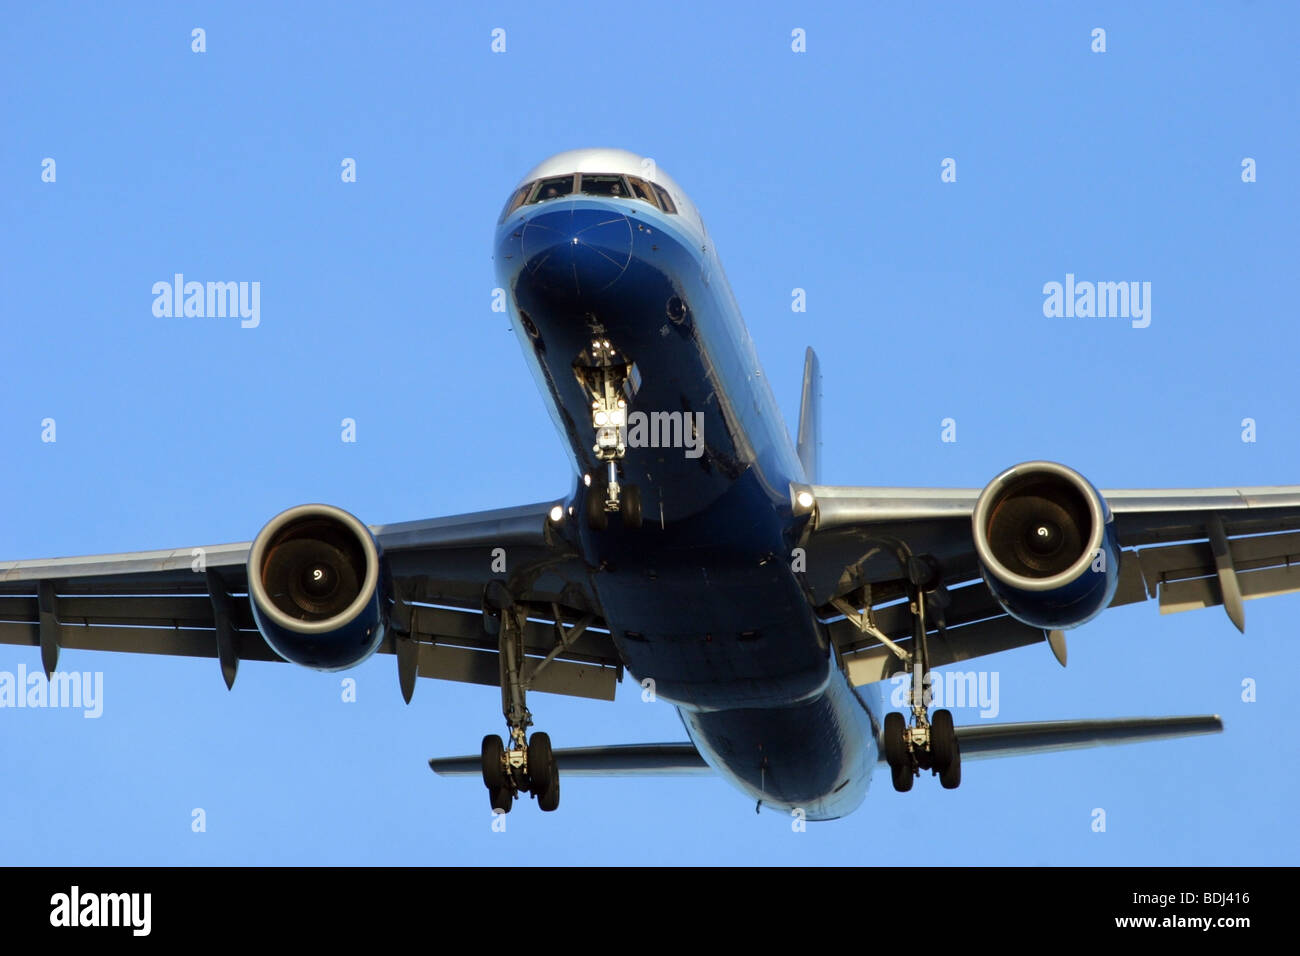 United Airlines airliner on final approach for Logan International airport in Boston Massachusetts. Stock Photo